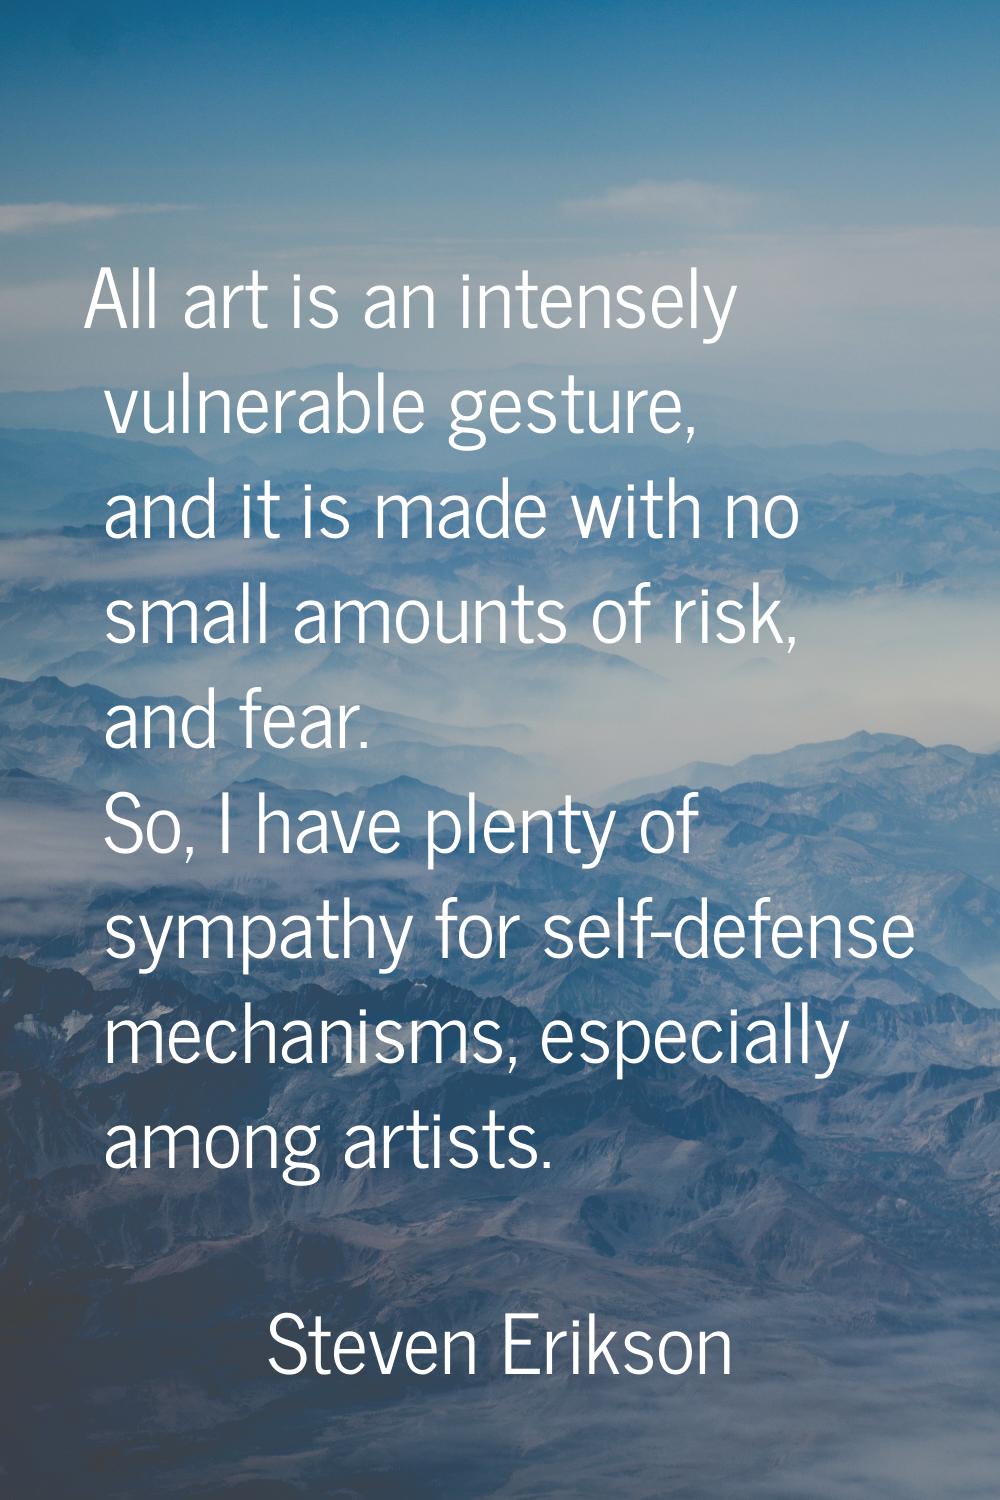 All art is an intensely vulnerable gesture, and it is made with no small amounts of risk, and fear.